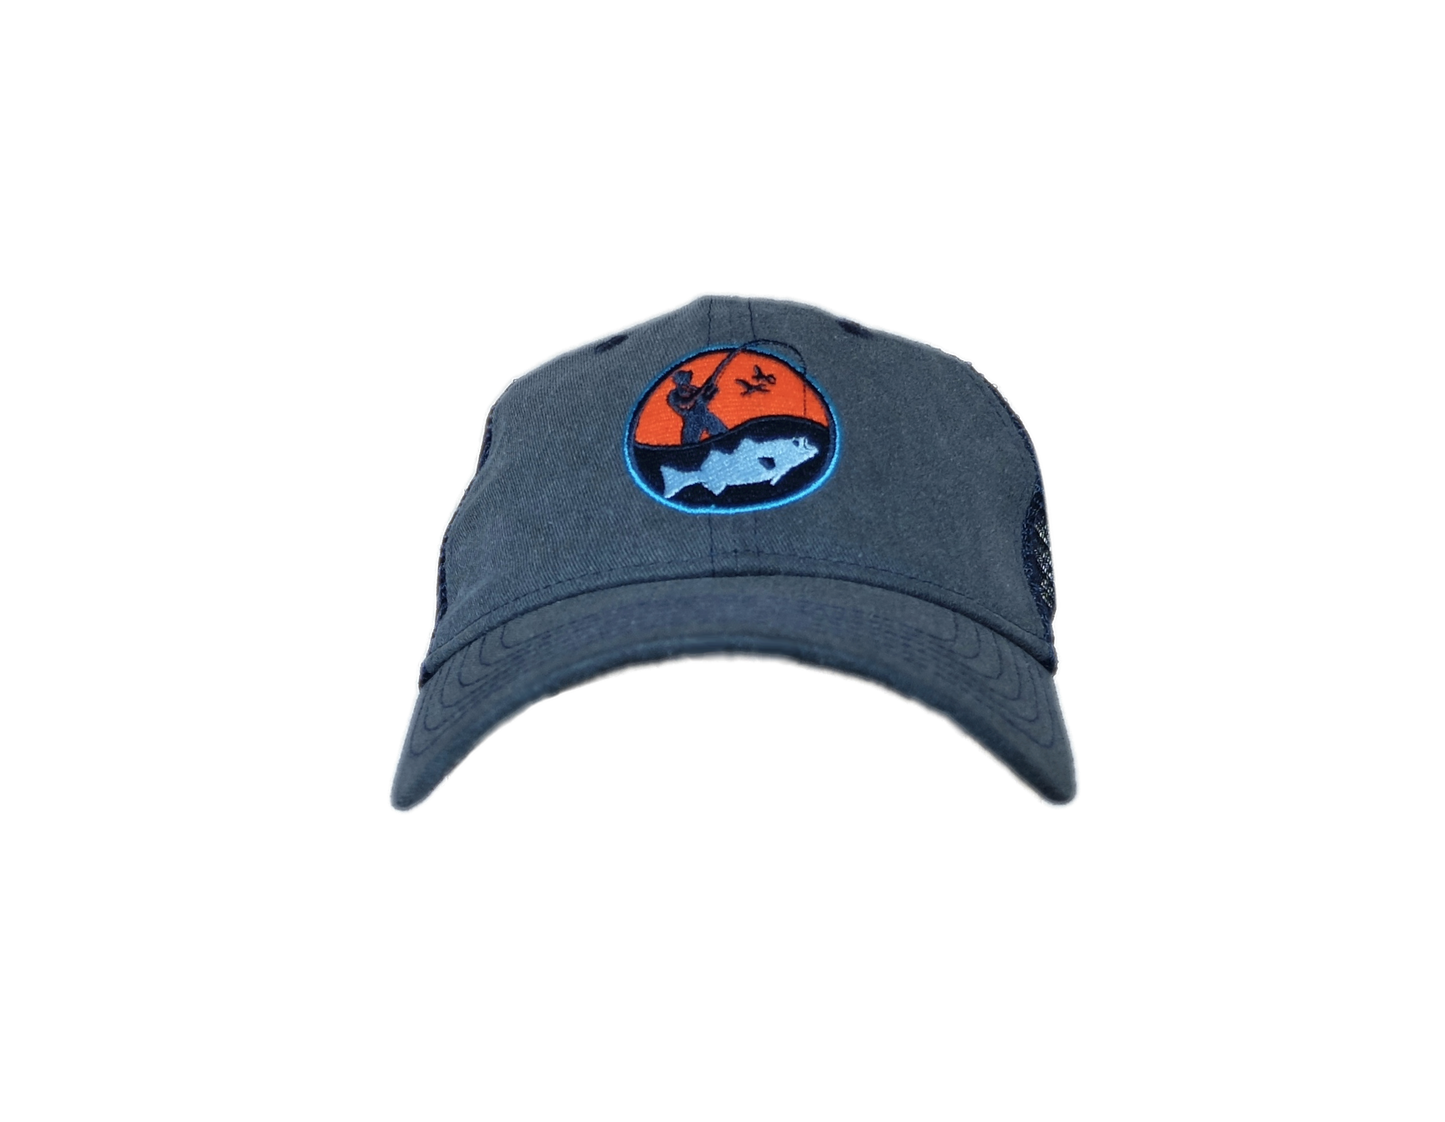 front view of dark grey and navy blue trucker cap with round embroidered orange and blue fisherman logo